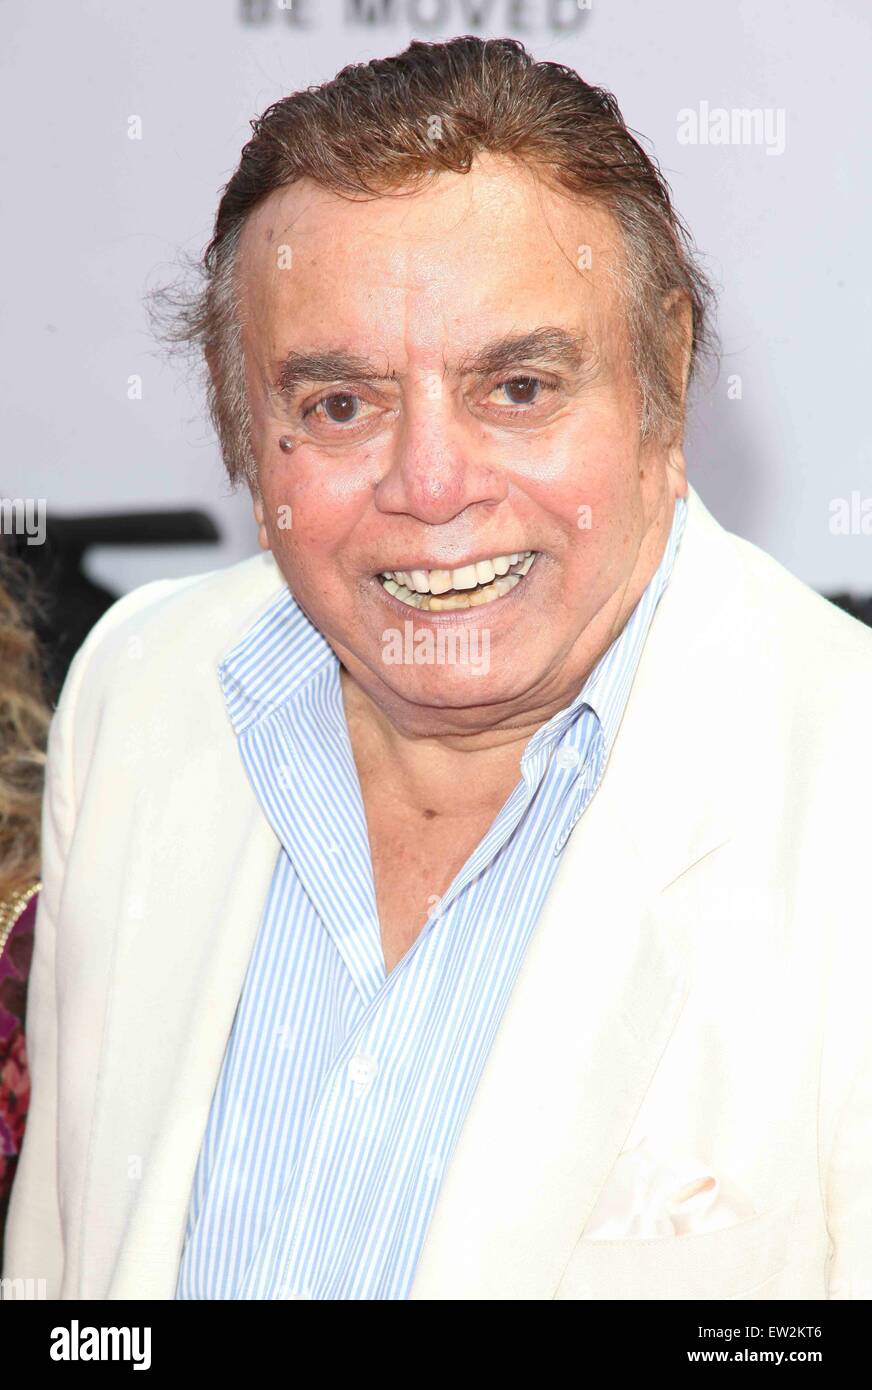 New York premiere of 'Paul Blart: Mall Cop 2' - Arrivals  Featuring: Shelly Desai Where: New York, United States When: 11 Apr 2015 C Stock Photo